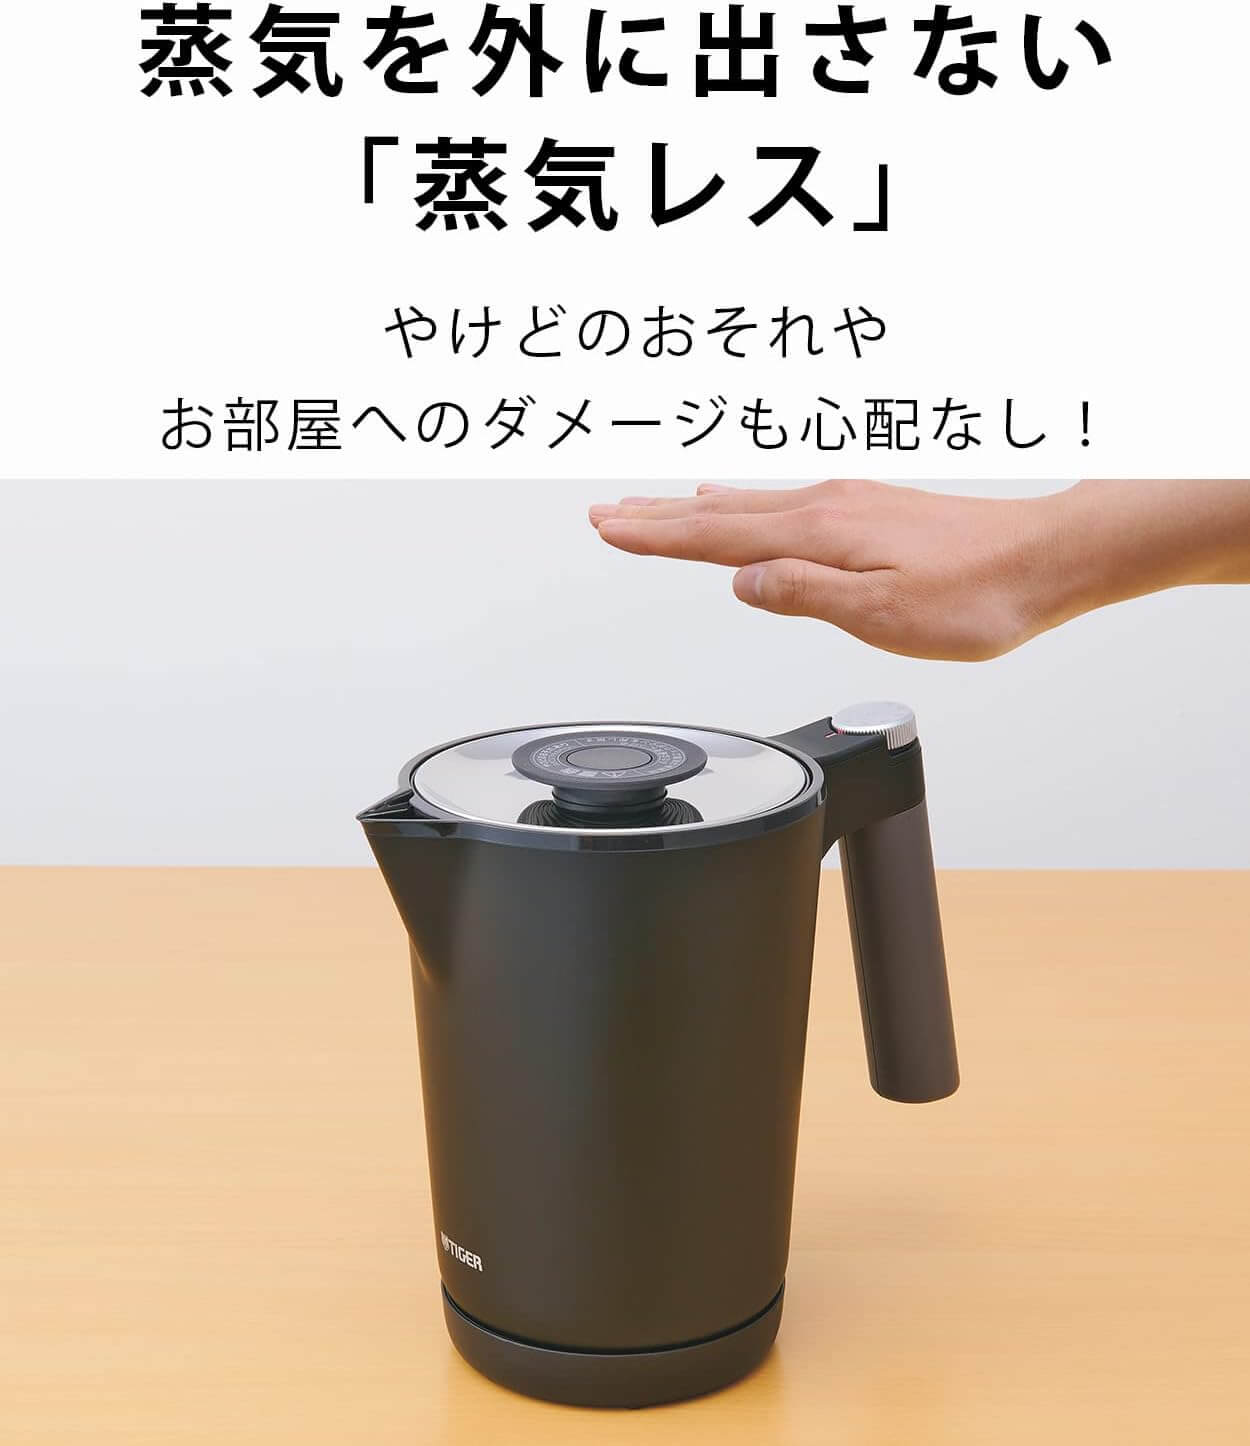 Steamless Electric Kettle PTQ-A100 - imy Shop Japan